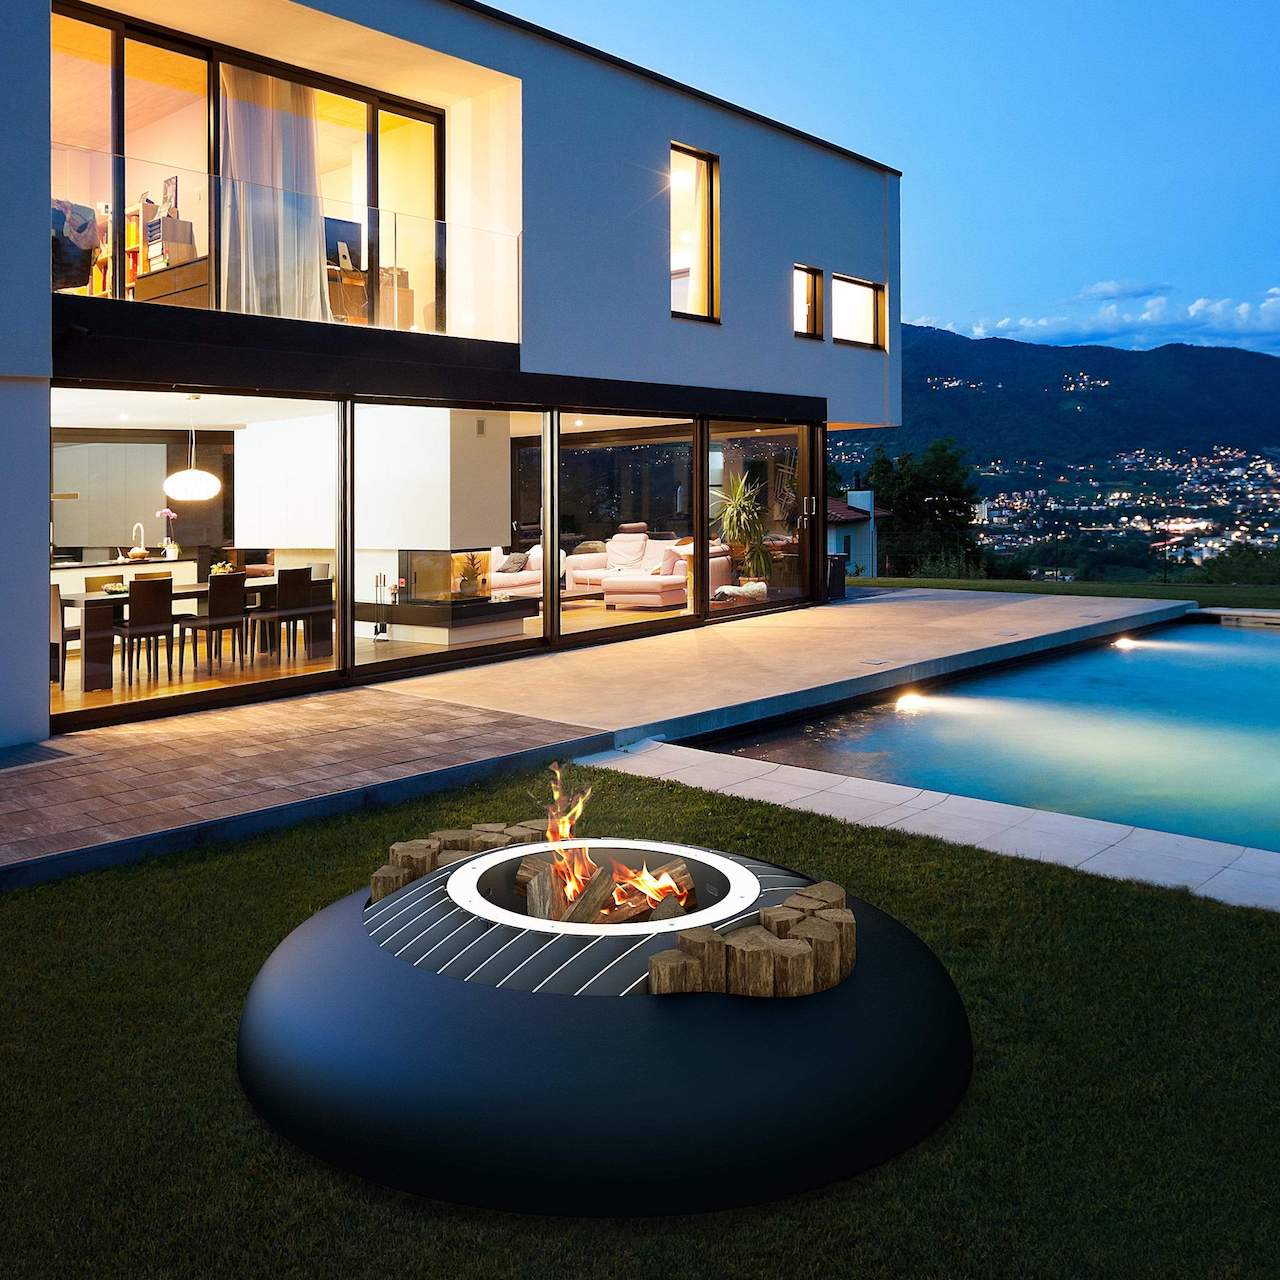 Mime Fire Pit